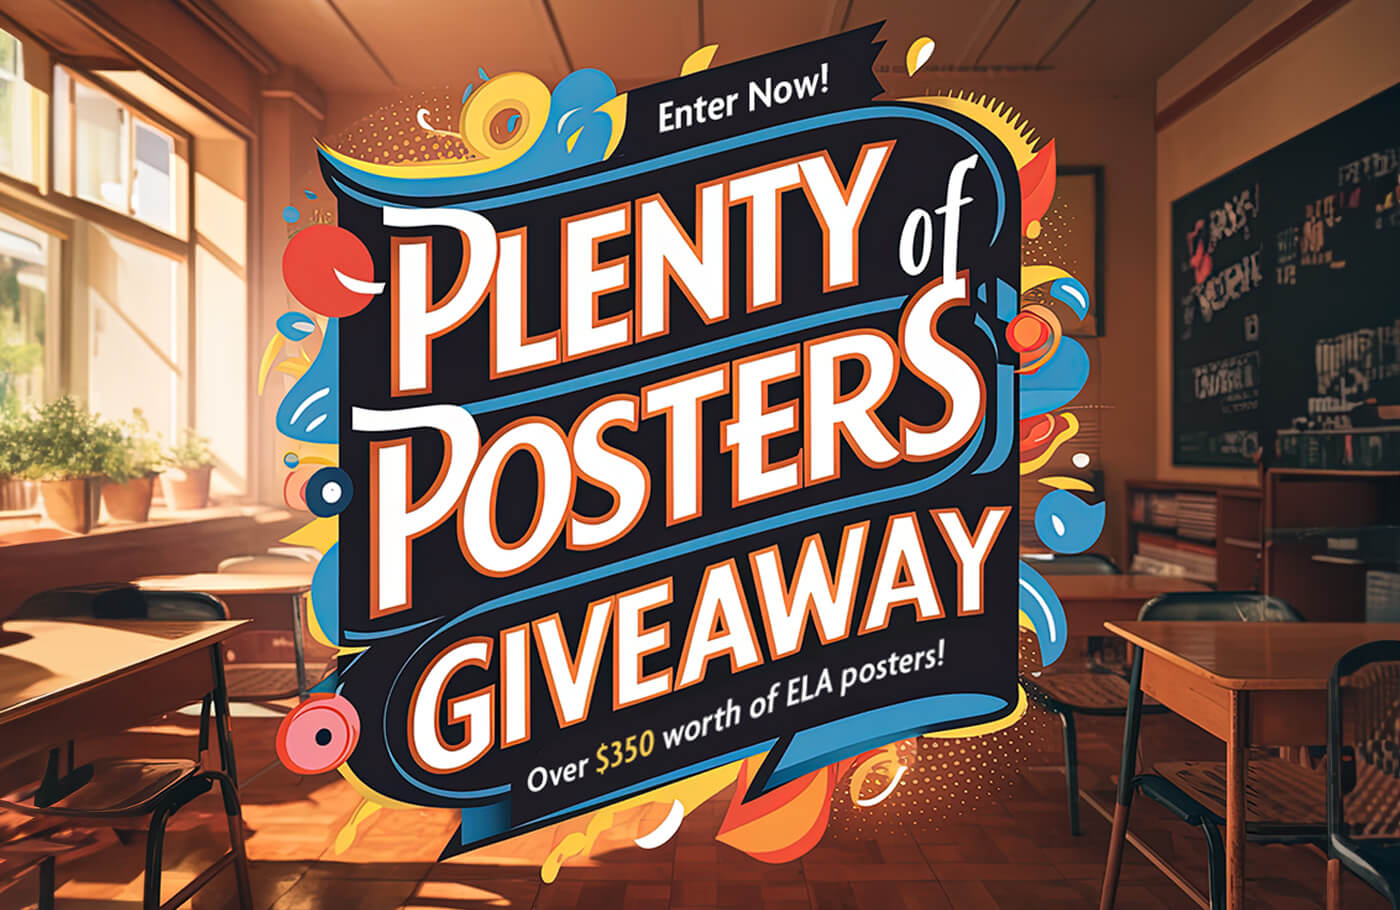 It’s time to transform your teaching space! Enter for your chance to win an ELA classroom poster set worth over $350!